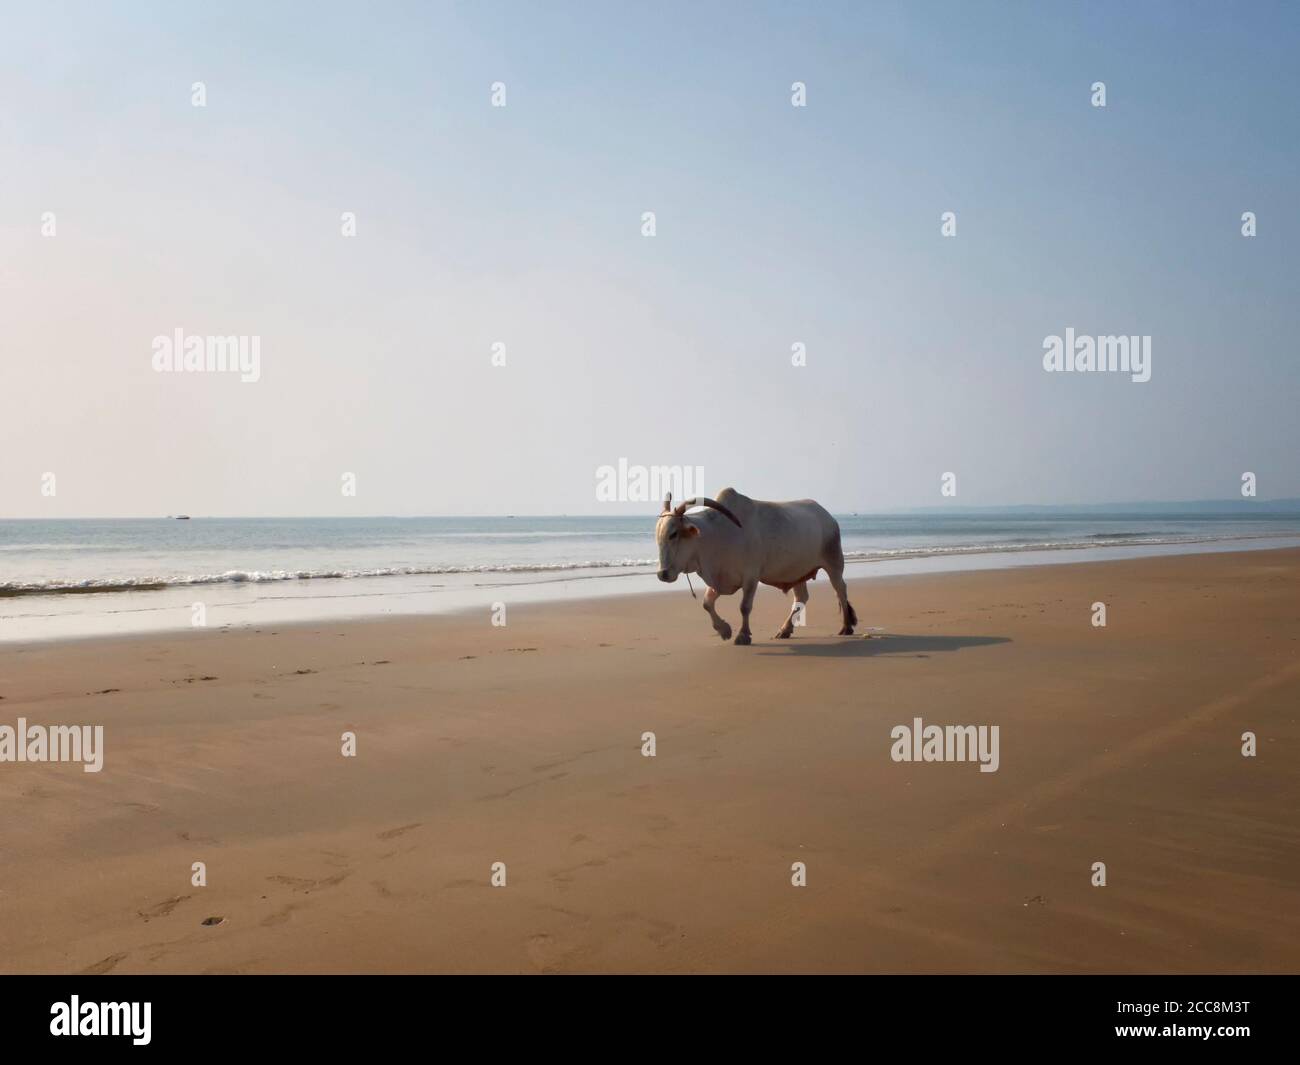 White horned bull walks down the sandy beach opposite the sea. Indian cow, holy cow, sacred animal. Stock Photo